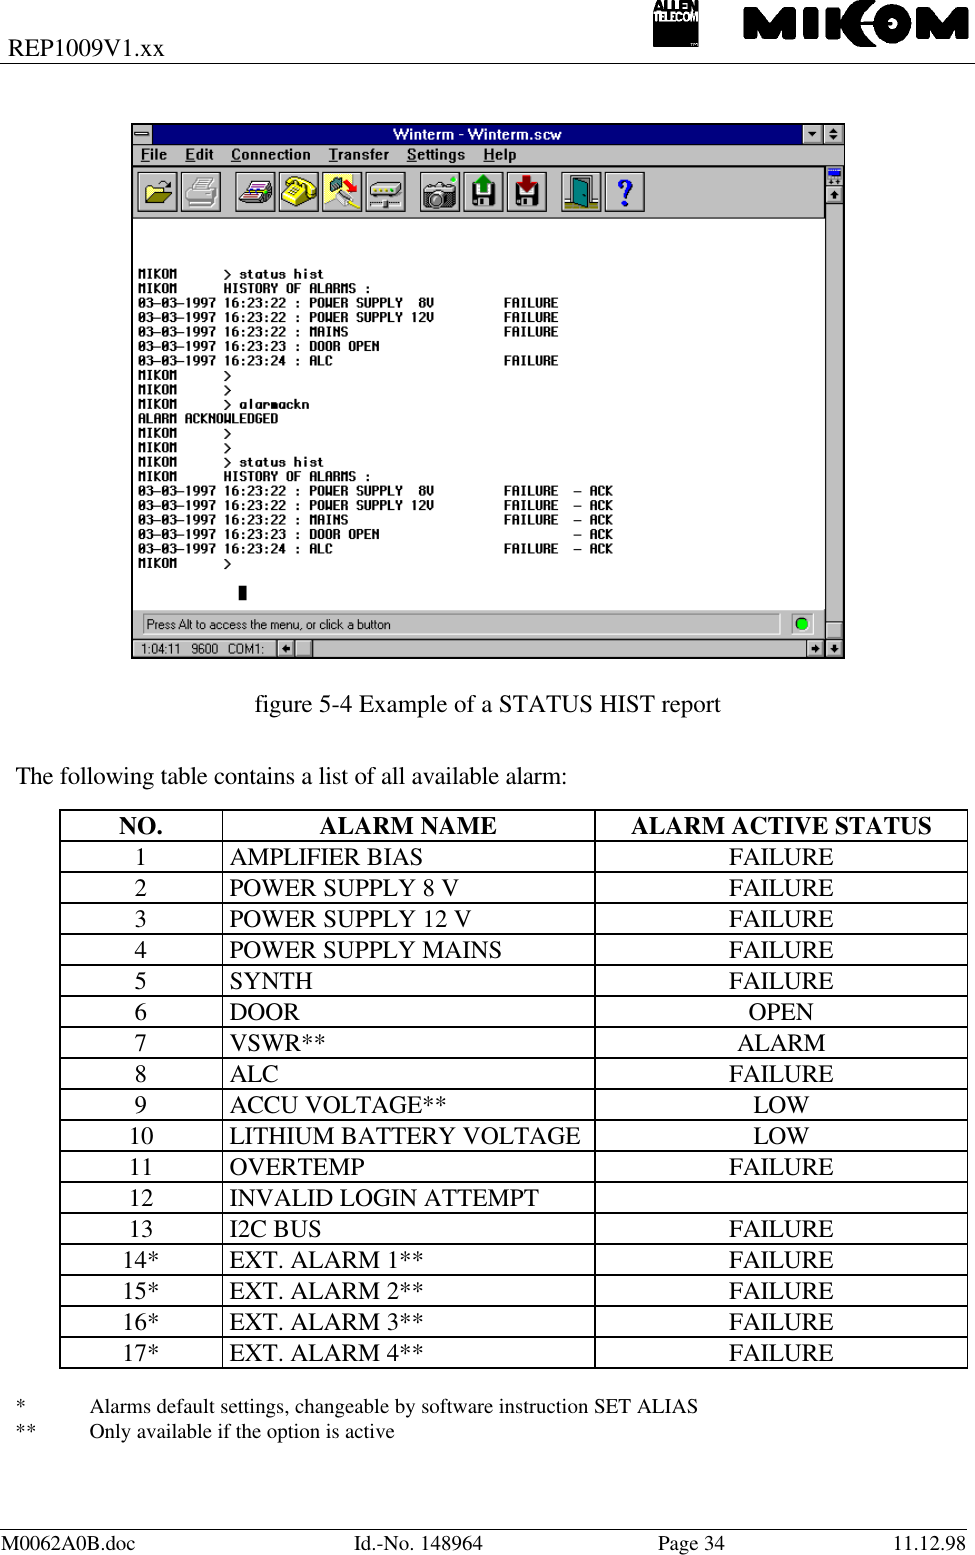 REP1009V1.xxM0062A0B.doc Id.-No. 148964 Page 34 11.12.98figure 5-4 Example of a STATUS HIST reportThe following table contains a list of all available alarm:NO. ALARM NAME ALARM ACTIVE STATUS1AMPLIFIER BIAS FAILURE2POWER SUPPLY 8 V FAILURE3POWER SUPPLY 12 V FAILURE4POWER SUPPLY MAINS FAILURE5SYNTH FAILURE6DOOR OPEN7VSWR** ALARM8ALC FAILURE9ACCU VOLTAGE** LOW10 LITHIUM BATTERY VOLTAGE LOW11 OVERTEMP FAILURE12 INVALID LOGIN ATTEMPT13 I2C BUS FAILURE14* EXT. ALARM 1** FAILURE15* EXT. ALARM 2** FAILURE16* EXT. ALARM 3** FAILURE17* EXT. ALARM 4** FAILURE*Alarms default settings, changeable by software instruction SET ALIAS** Only available if the option is active